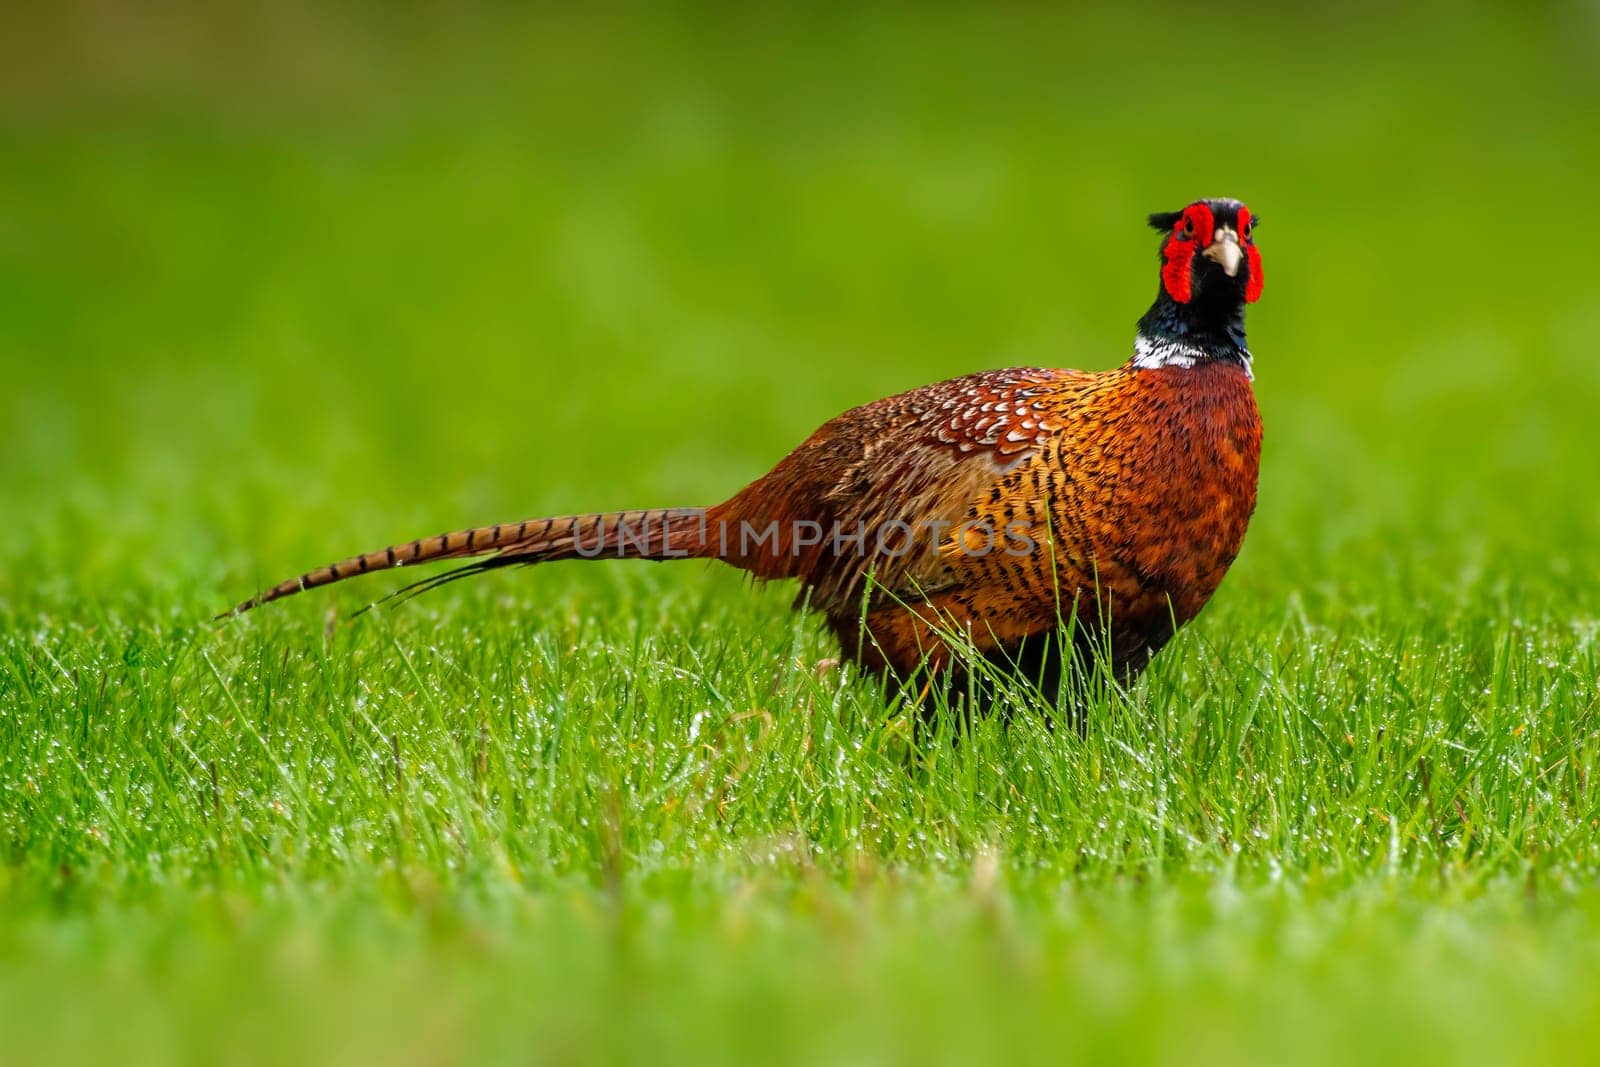 a pheasant rooster (Phasianus colchicus) stands on a green meadow